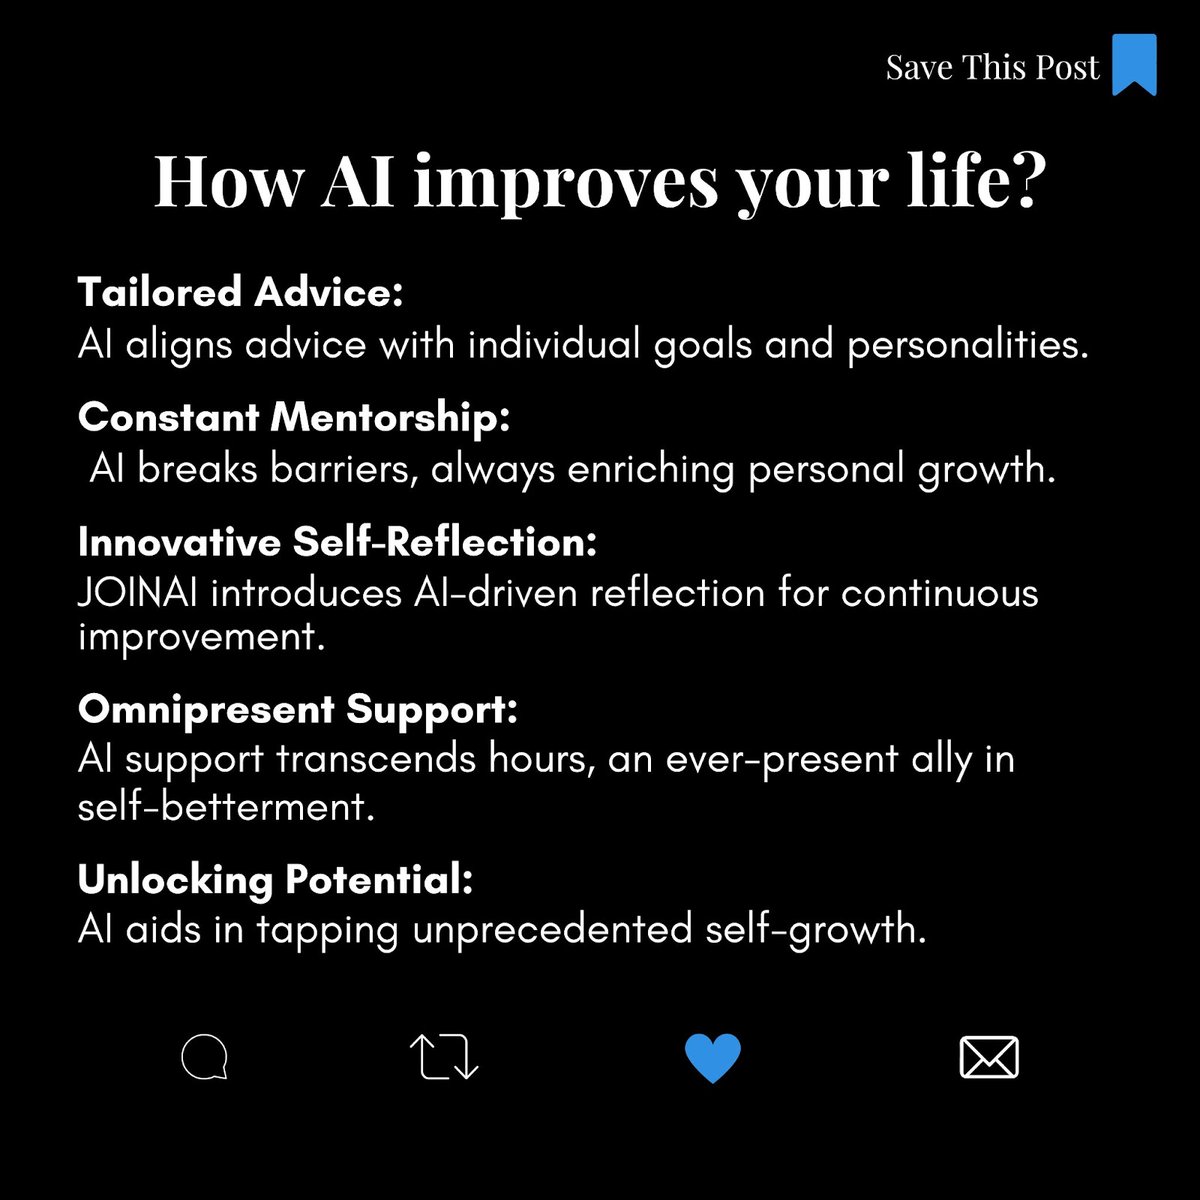 Unlock your potential with AI-guided self-growth! 🌱
--
Visit now: joinaiapp.com
.
.
.
#AISelfGrowth #EmpowerWithTech #DigitalMentorship #ContinuousImprovement #UnlockPotential #JOINAIJourney